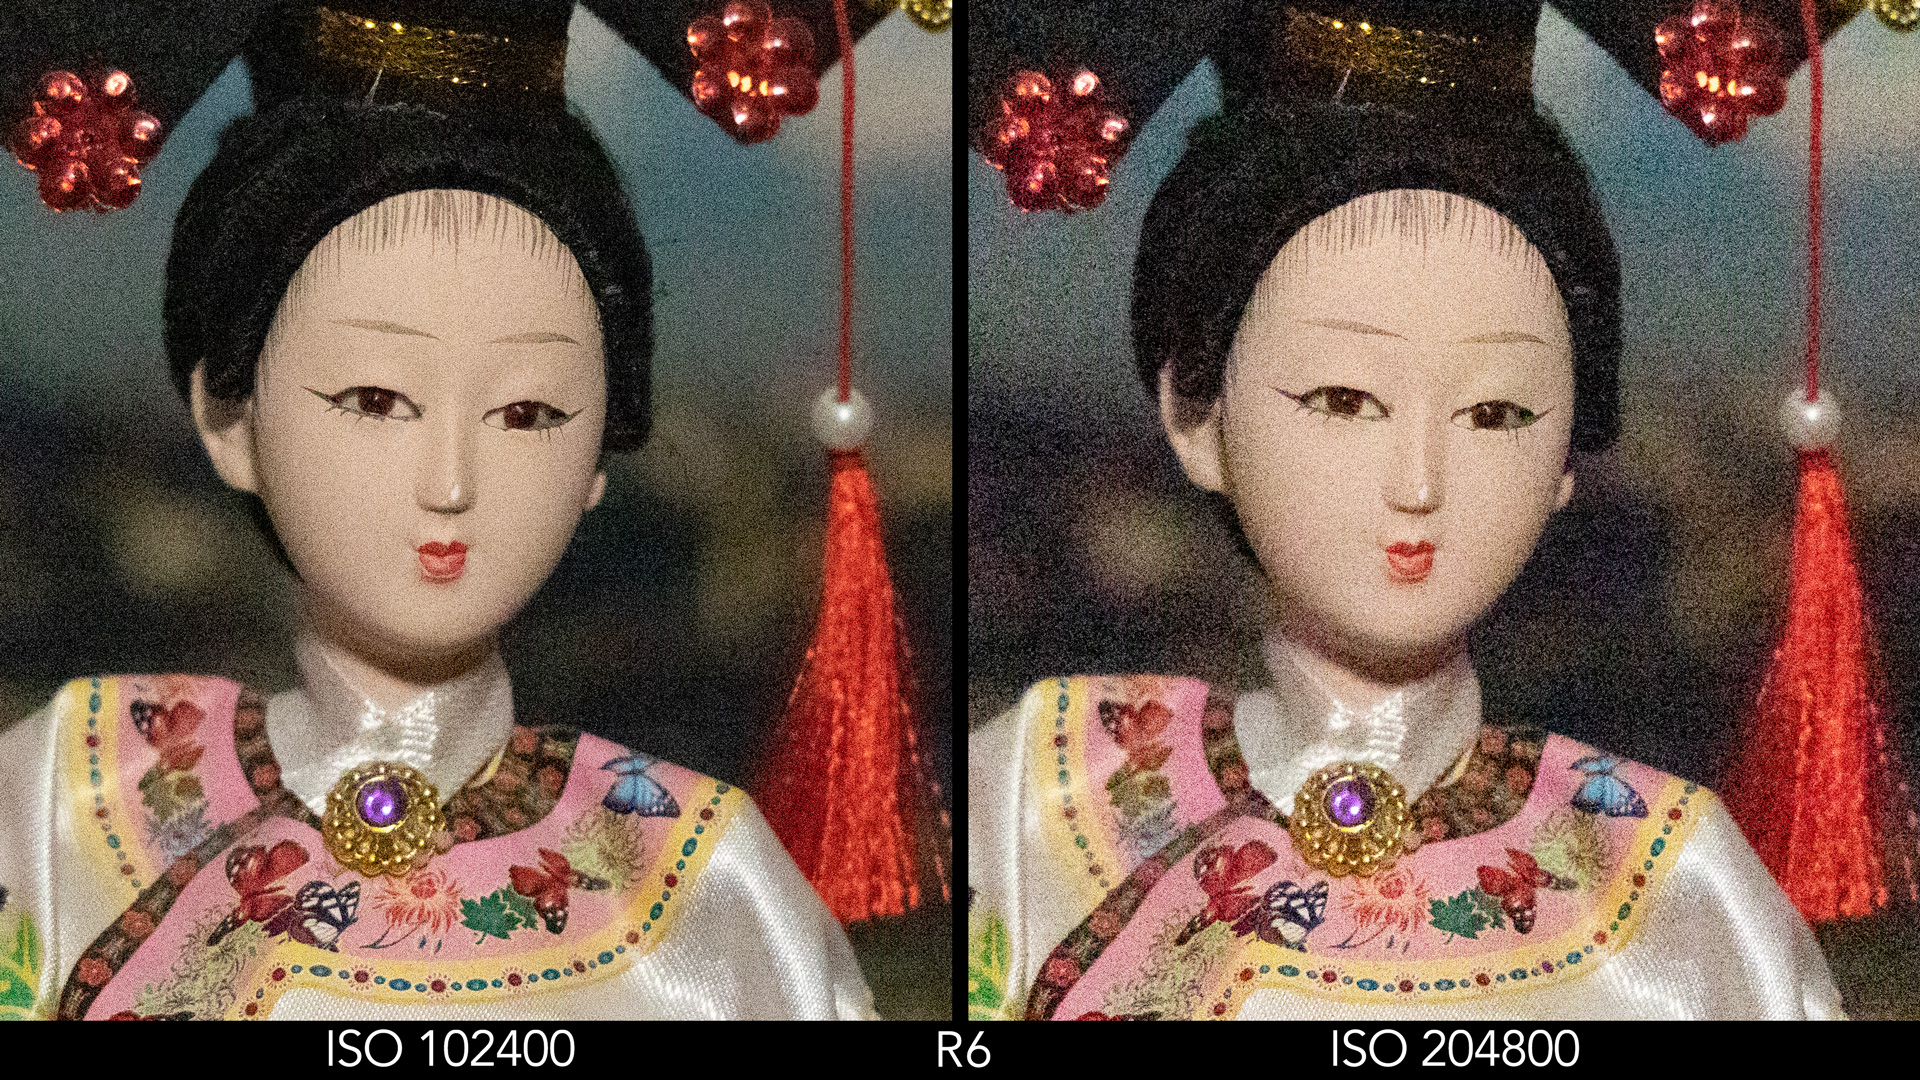 Side by side crop showing the quality at ISO 102400 and 204800 for the R6.